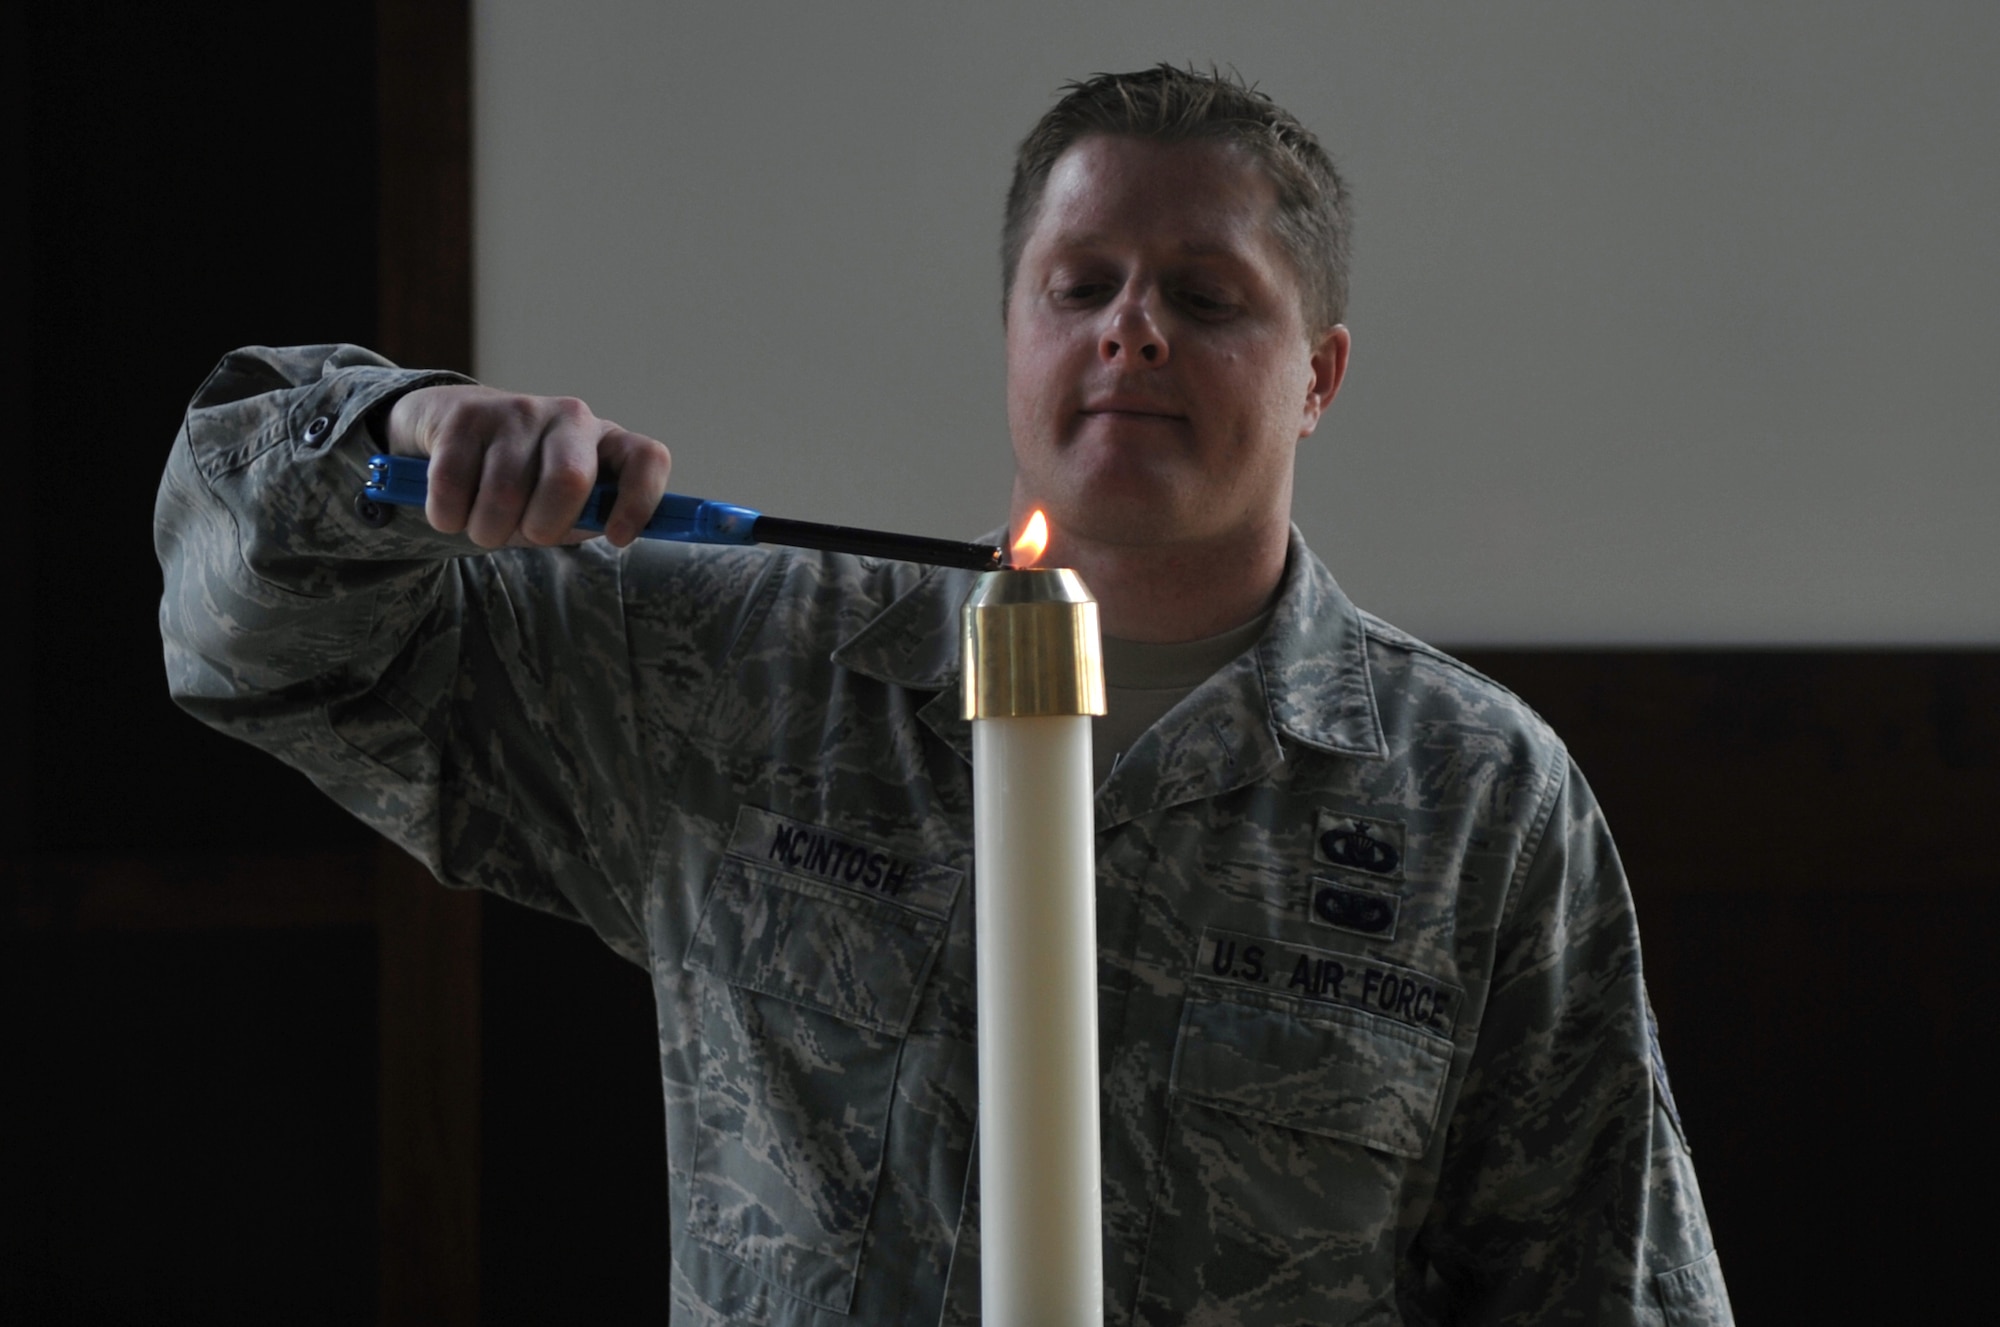 Tech Sgt. John P. McIntosh, 460th Space Wing chapel operations NCO in charge, lights a candle during a training to prepare for a chapel service September 15, 2016, at Buckley AFB, Colo. Although it’s not their normal duty to prepare the chapel for services, chaplain assistants are called upon to do so when deployed. (U.S. Air Force photo by Airman Holden S. Faul)